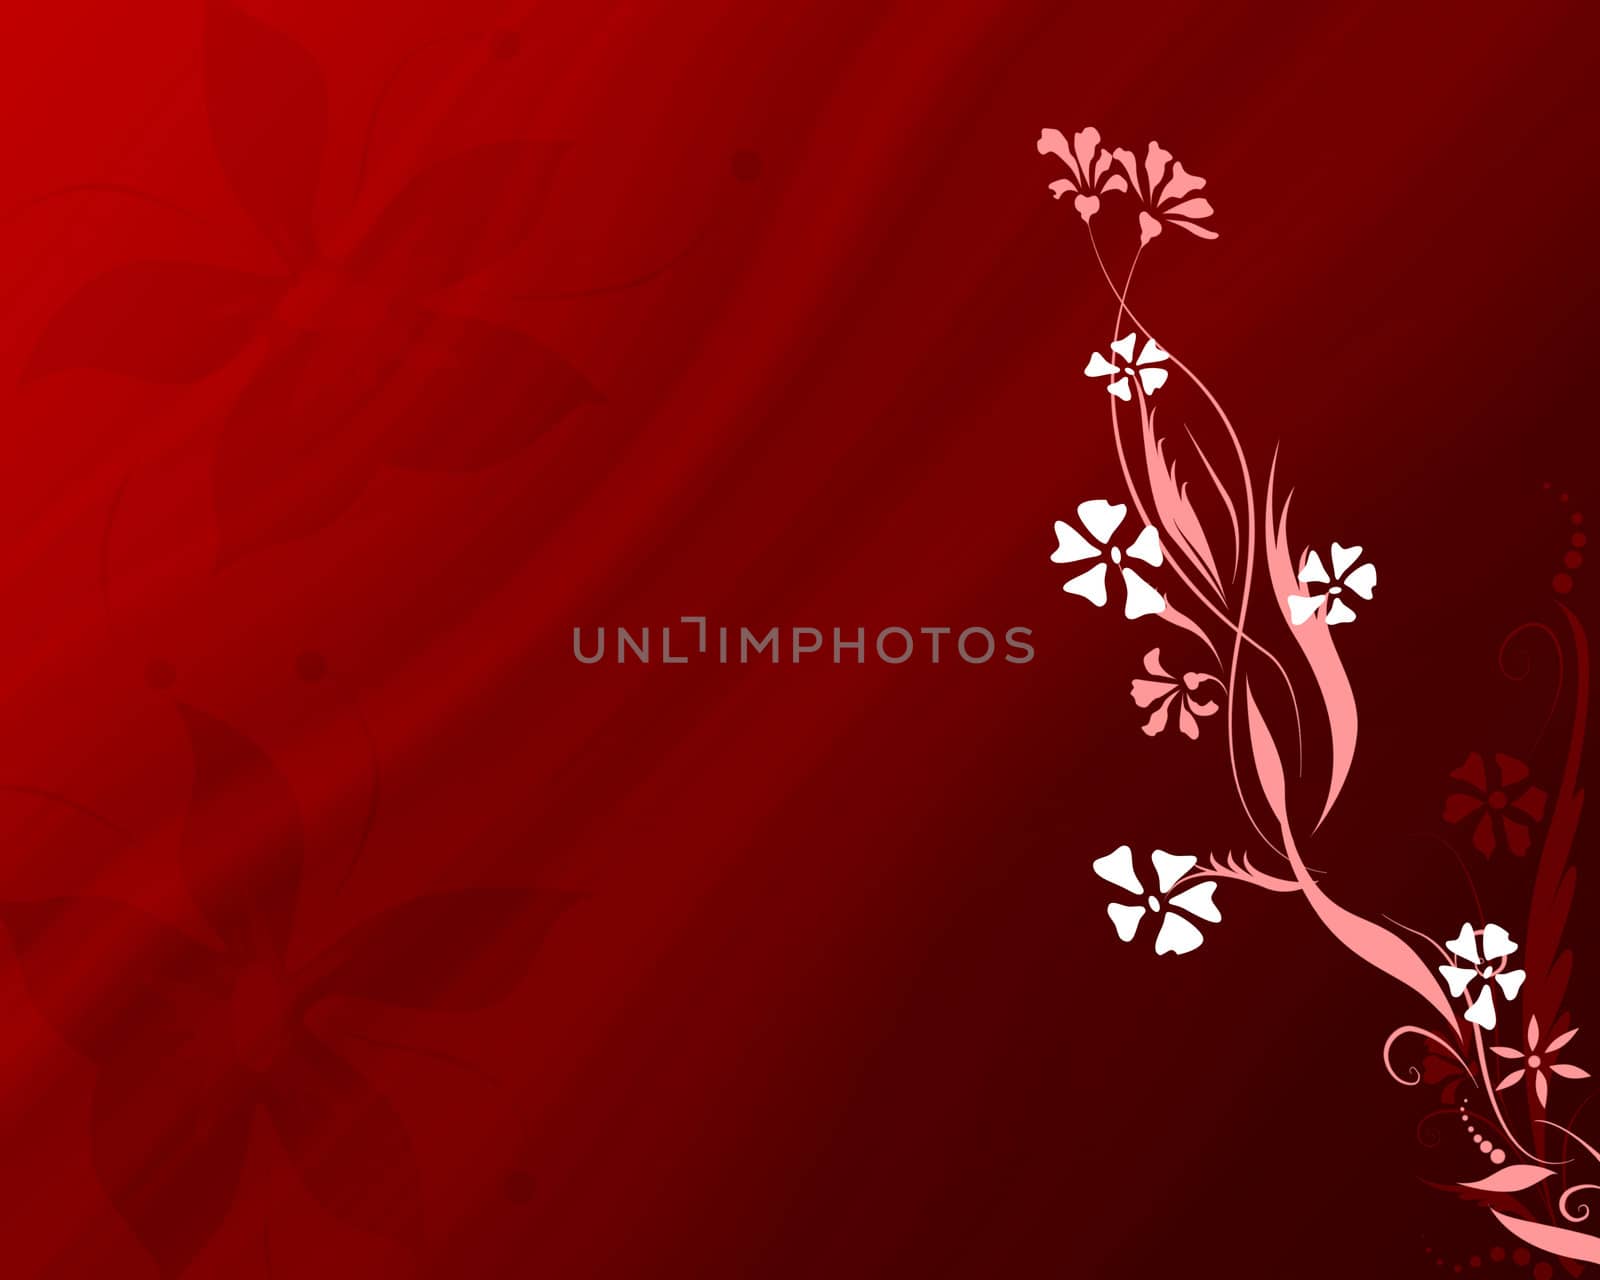 A red background with floral patterns